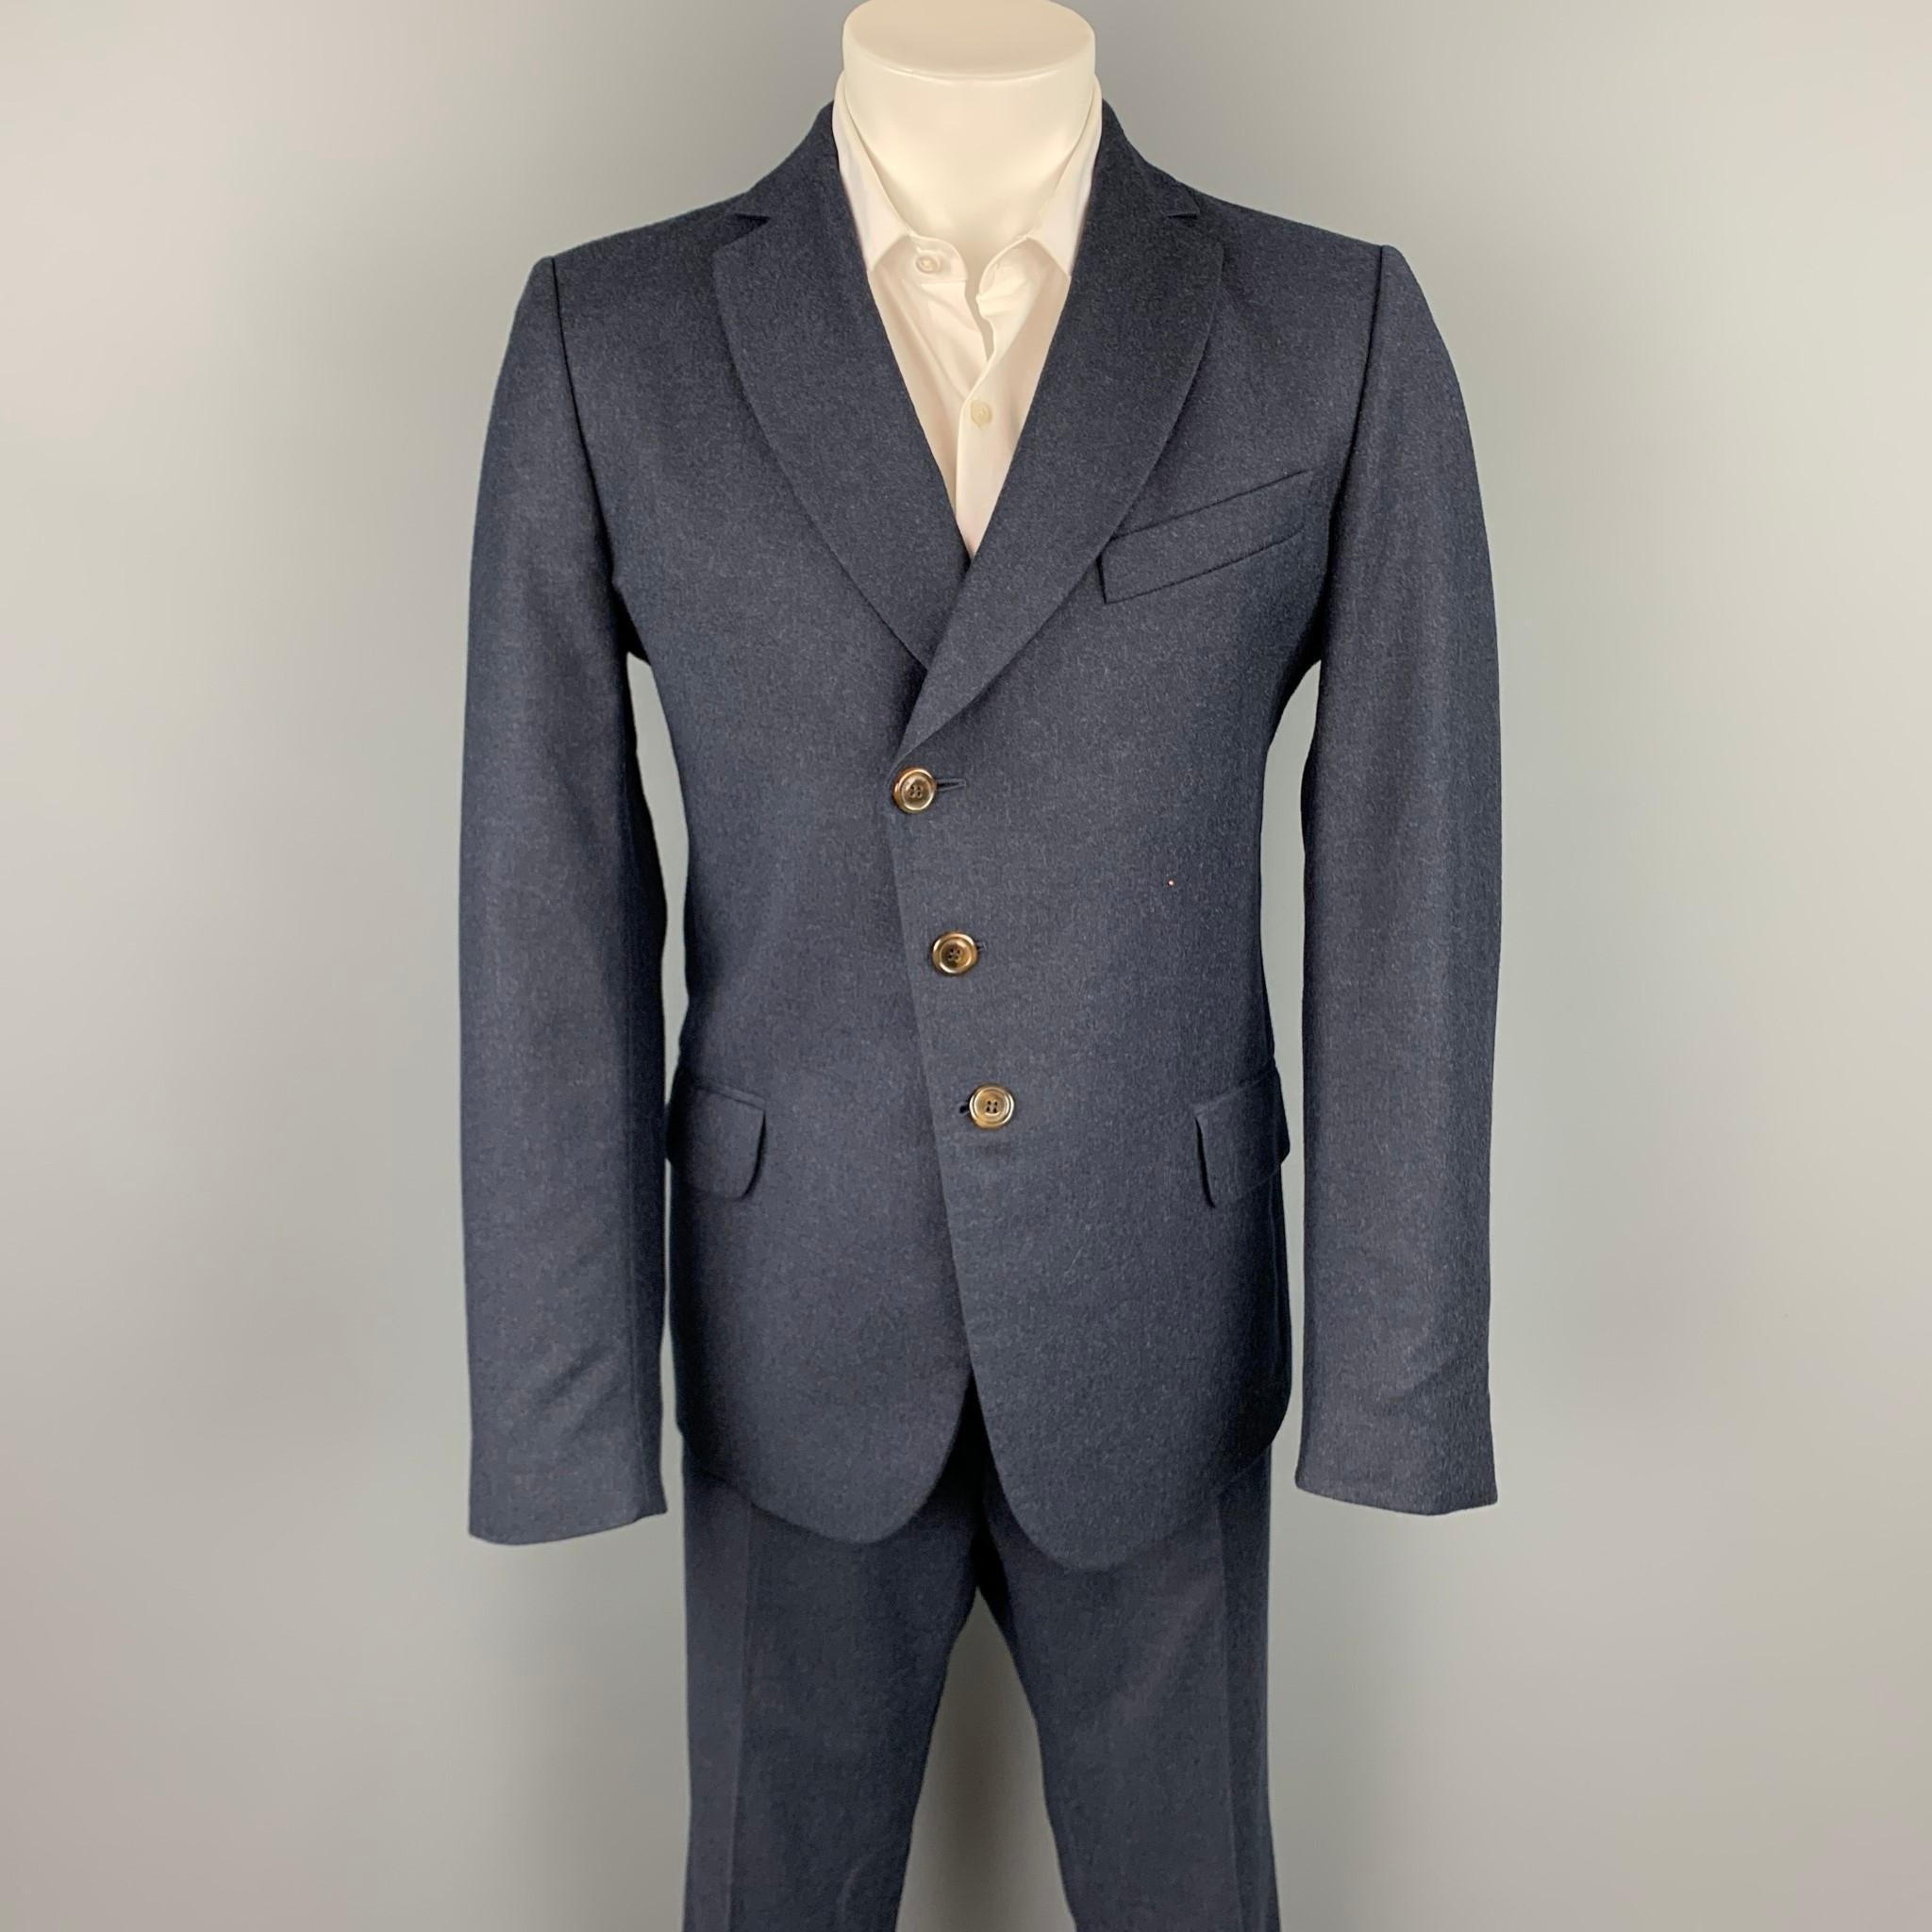 VIVIENNE WESTWOOD MAN suit comes in a navy wool with a full print liner and includes a single breasted,  three button sport coat with a notch lapel and matching flat front trousers. Made in Italy.

Excellent Pre-Owned Condition.
Marked: IT